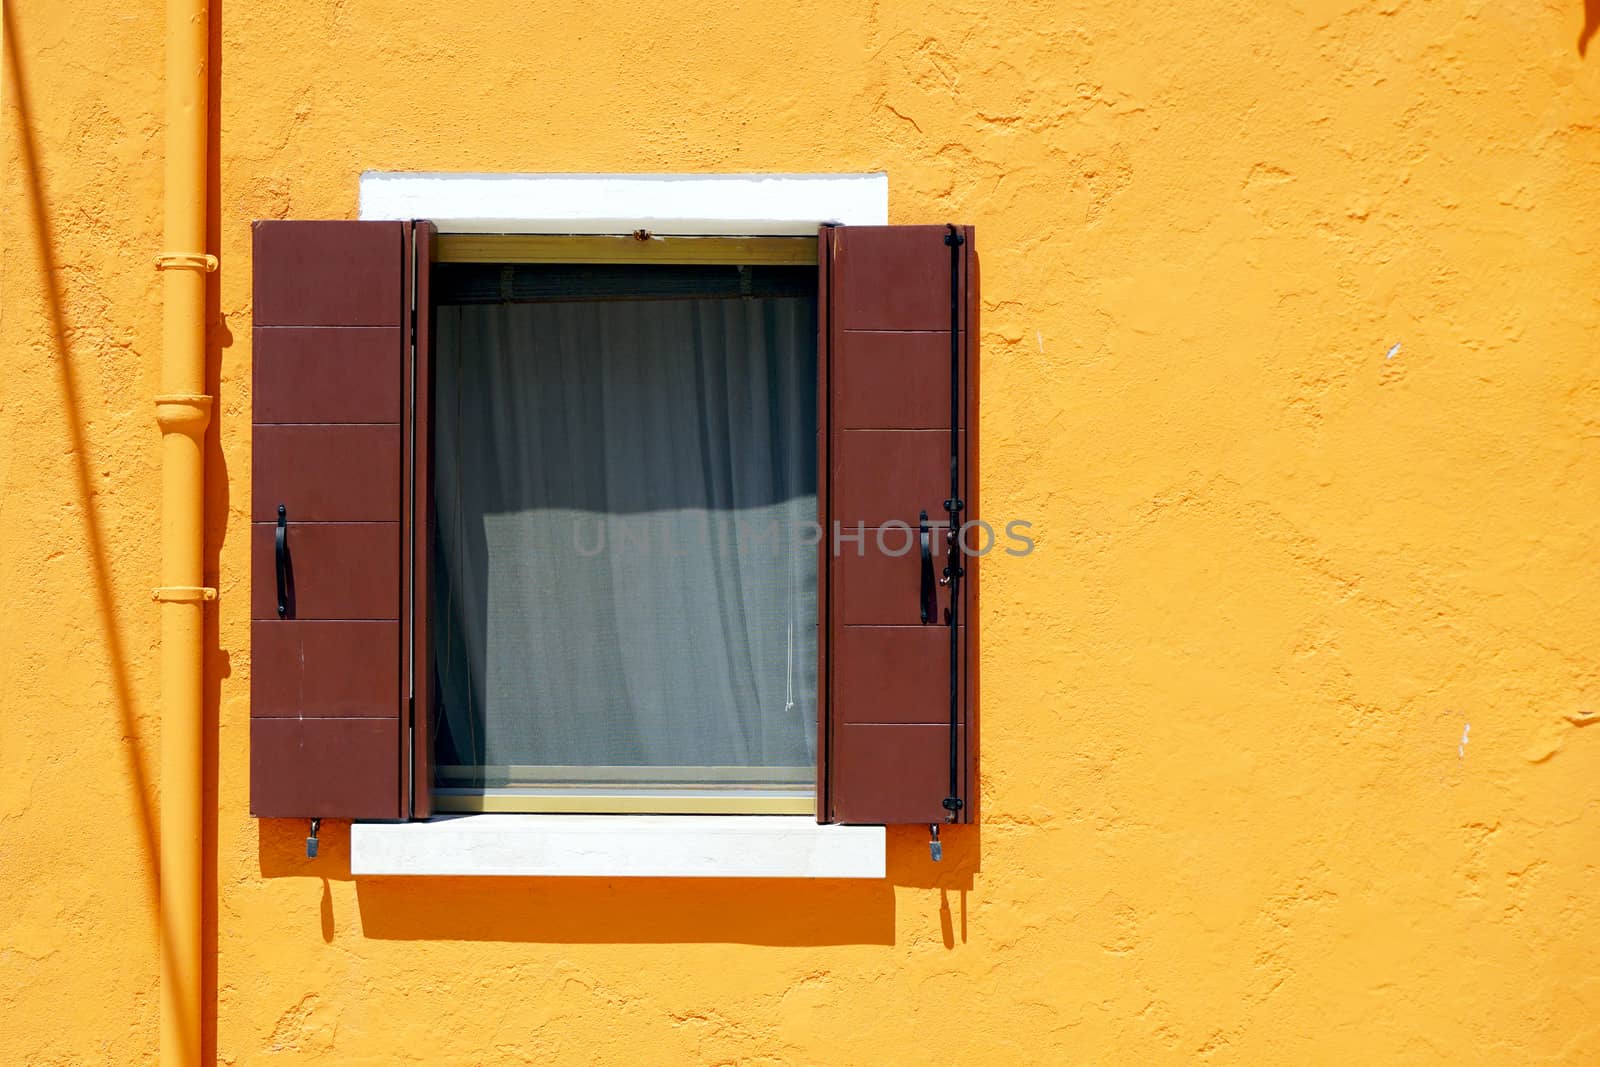 Brown Window in Burano on yellow color wall building architecture, Venice, Italy